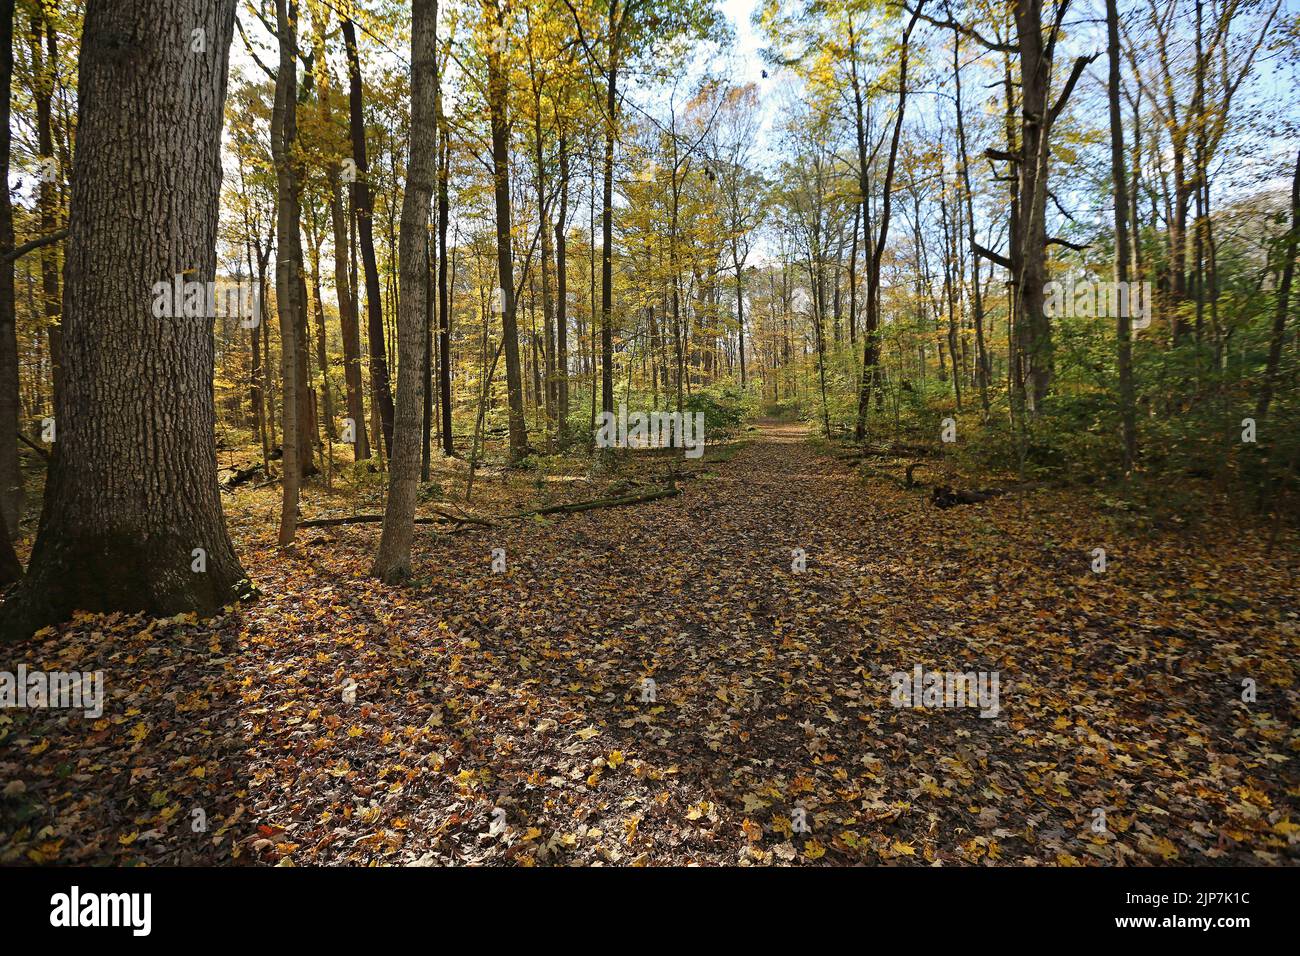 The tree and the trail in forest - Glen Helen Nature Preserve, Ohio Stock Photo